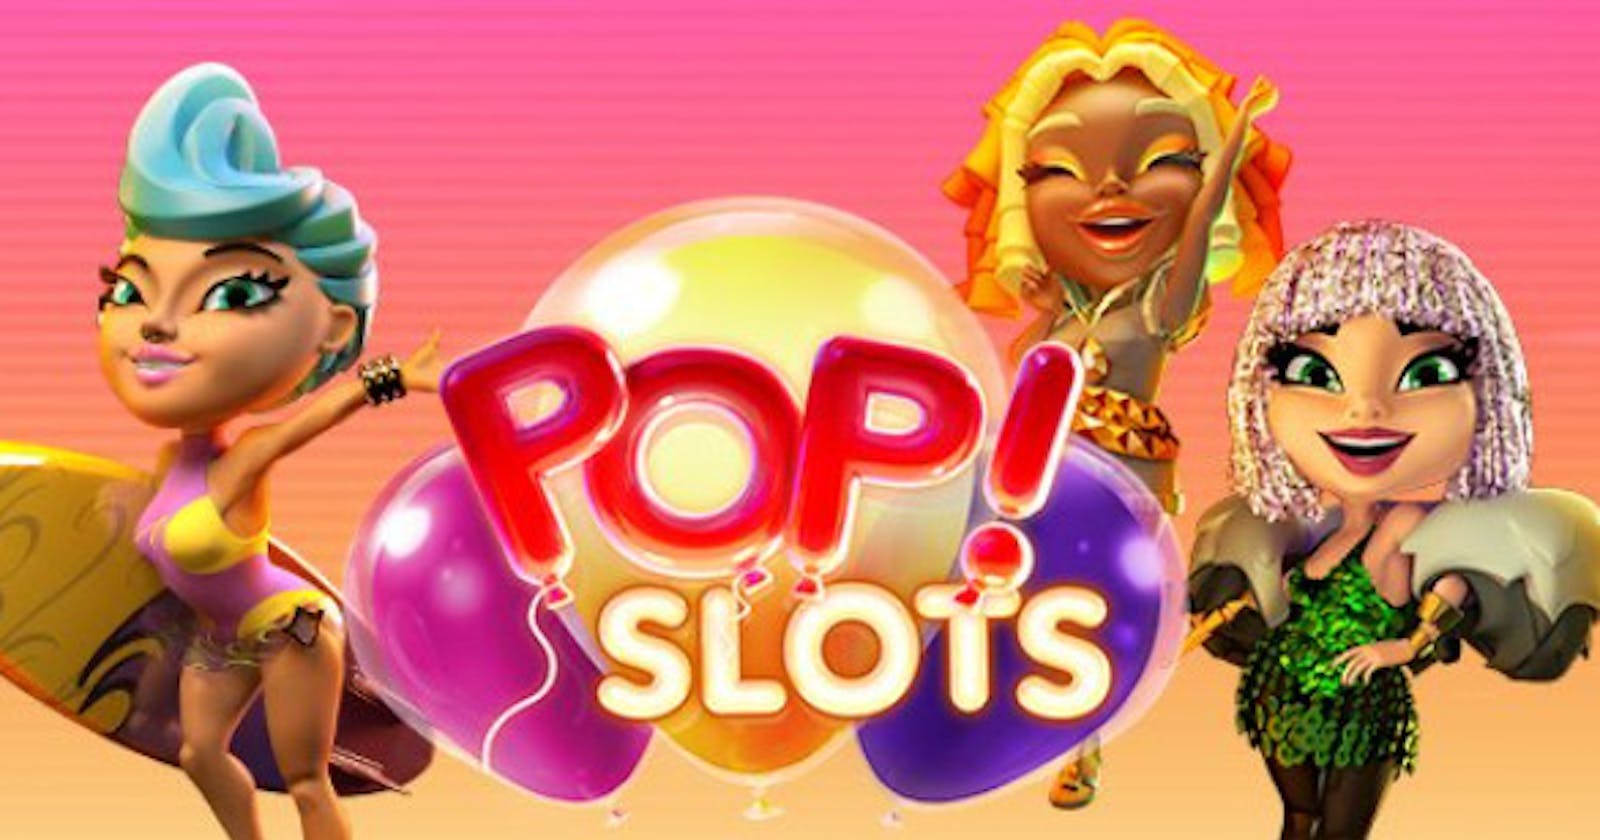 Pop Slots Cheats: Tips to Use It and Benefits